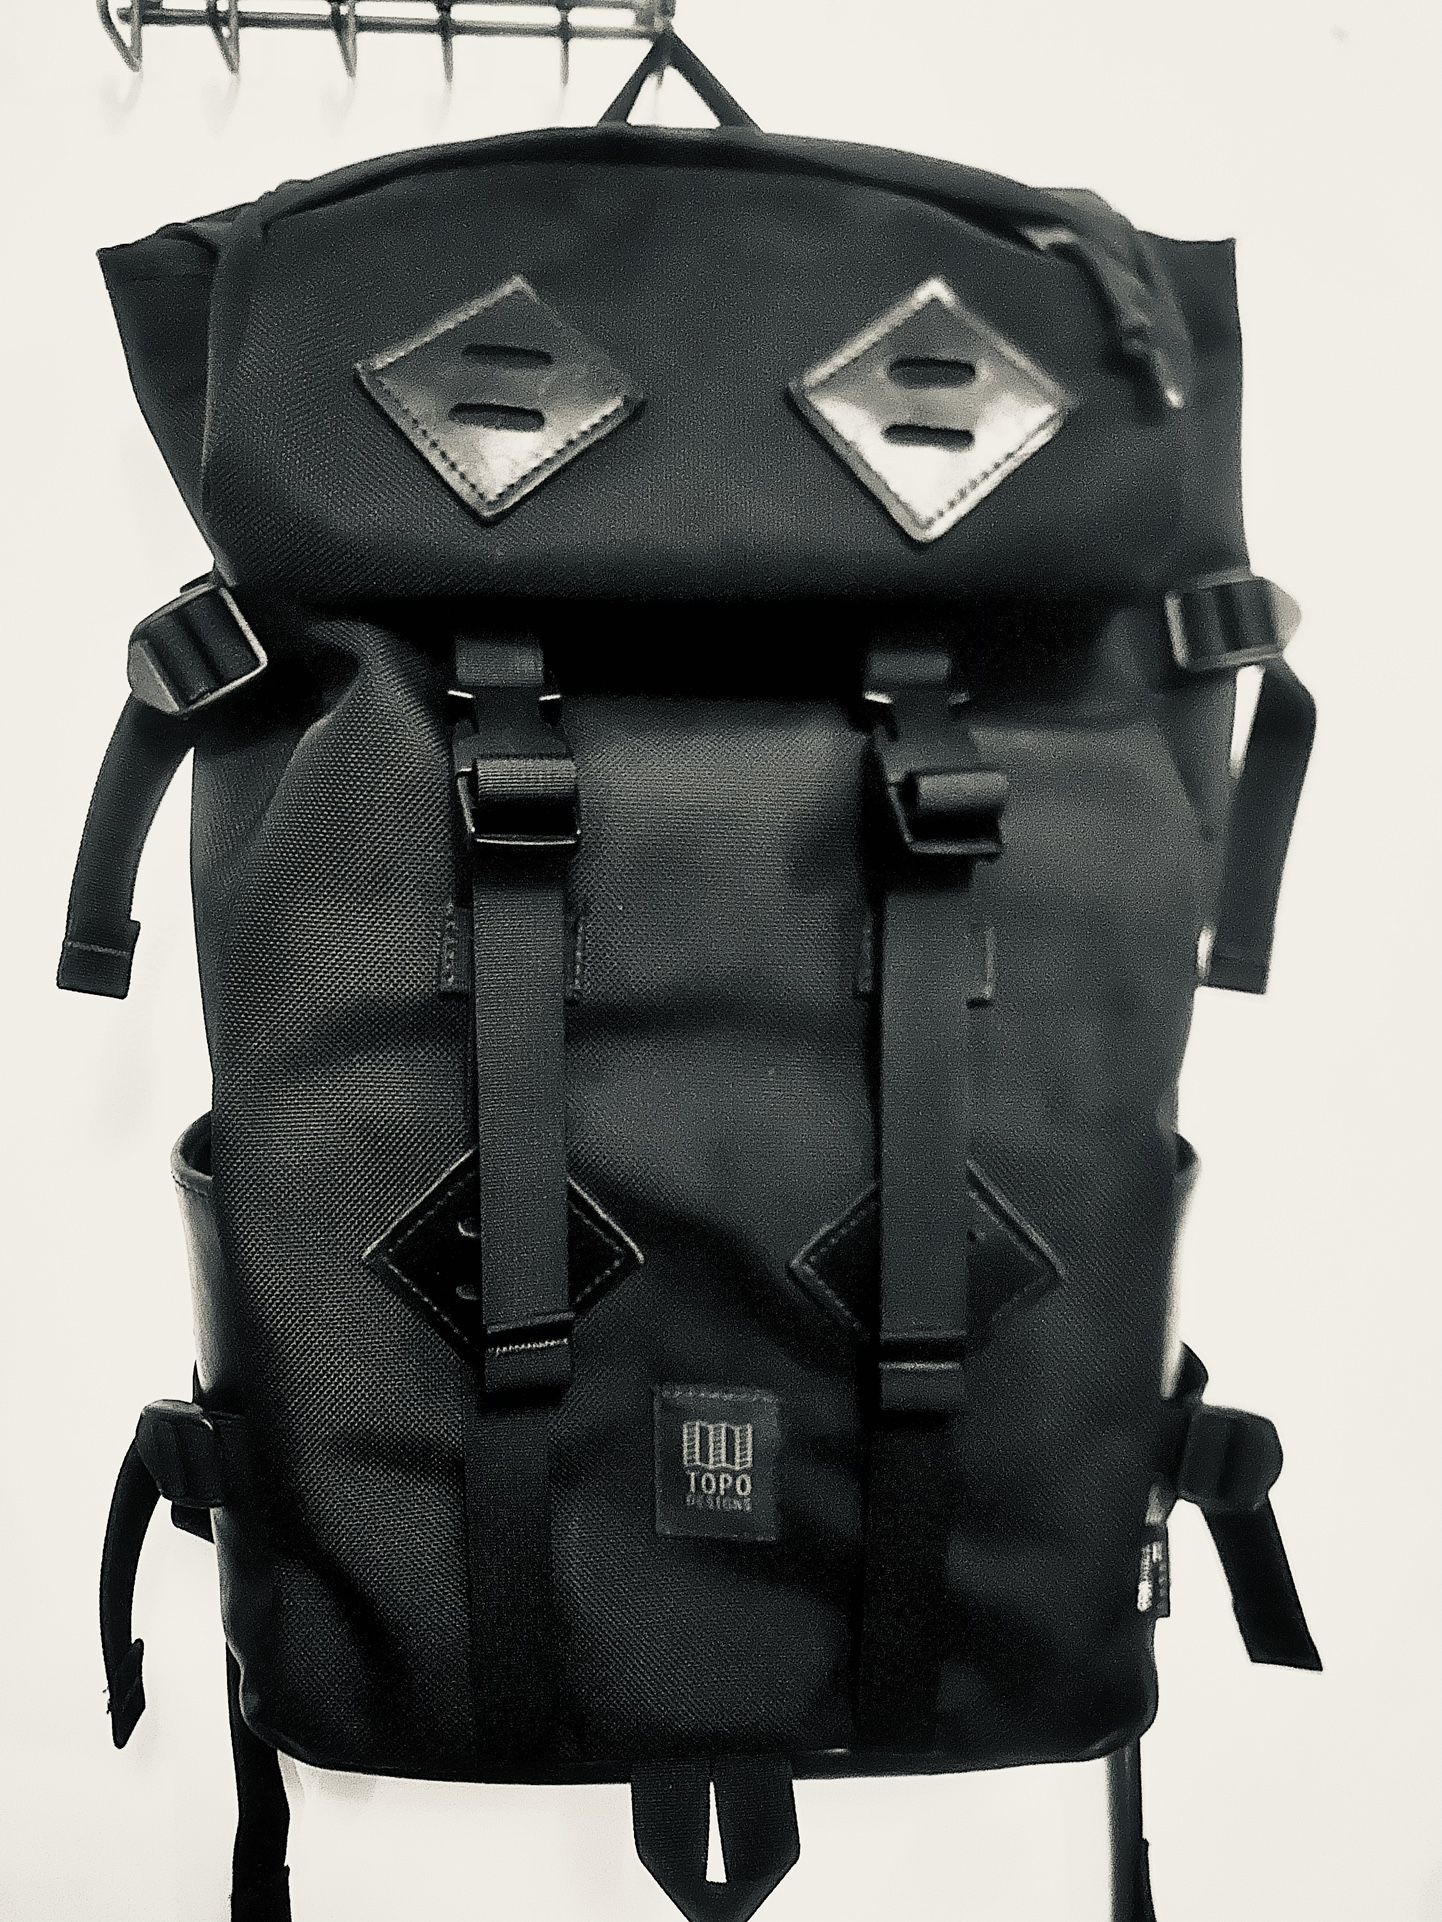 TOPO DESIGNS Backpack- Limited Edition 25 L Klettersack - BLACK Cordura/BLACK Leather- Like new) 